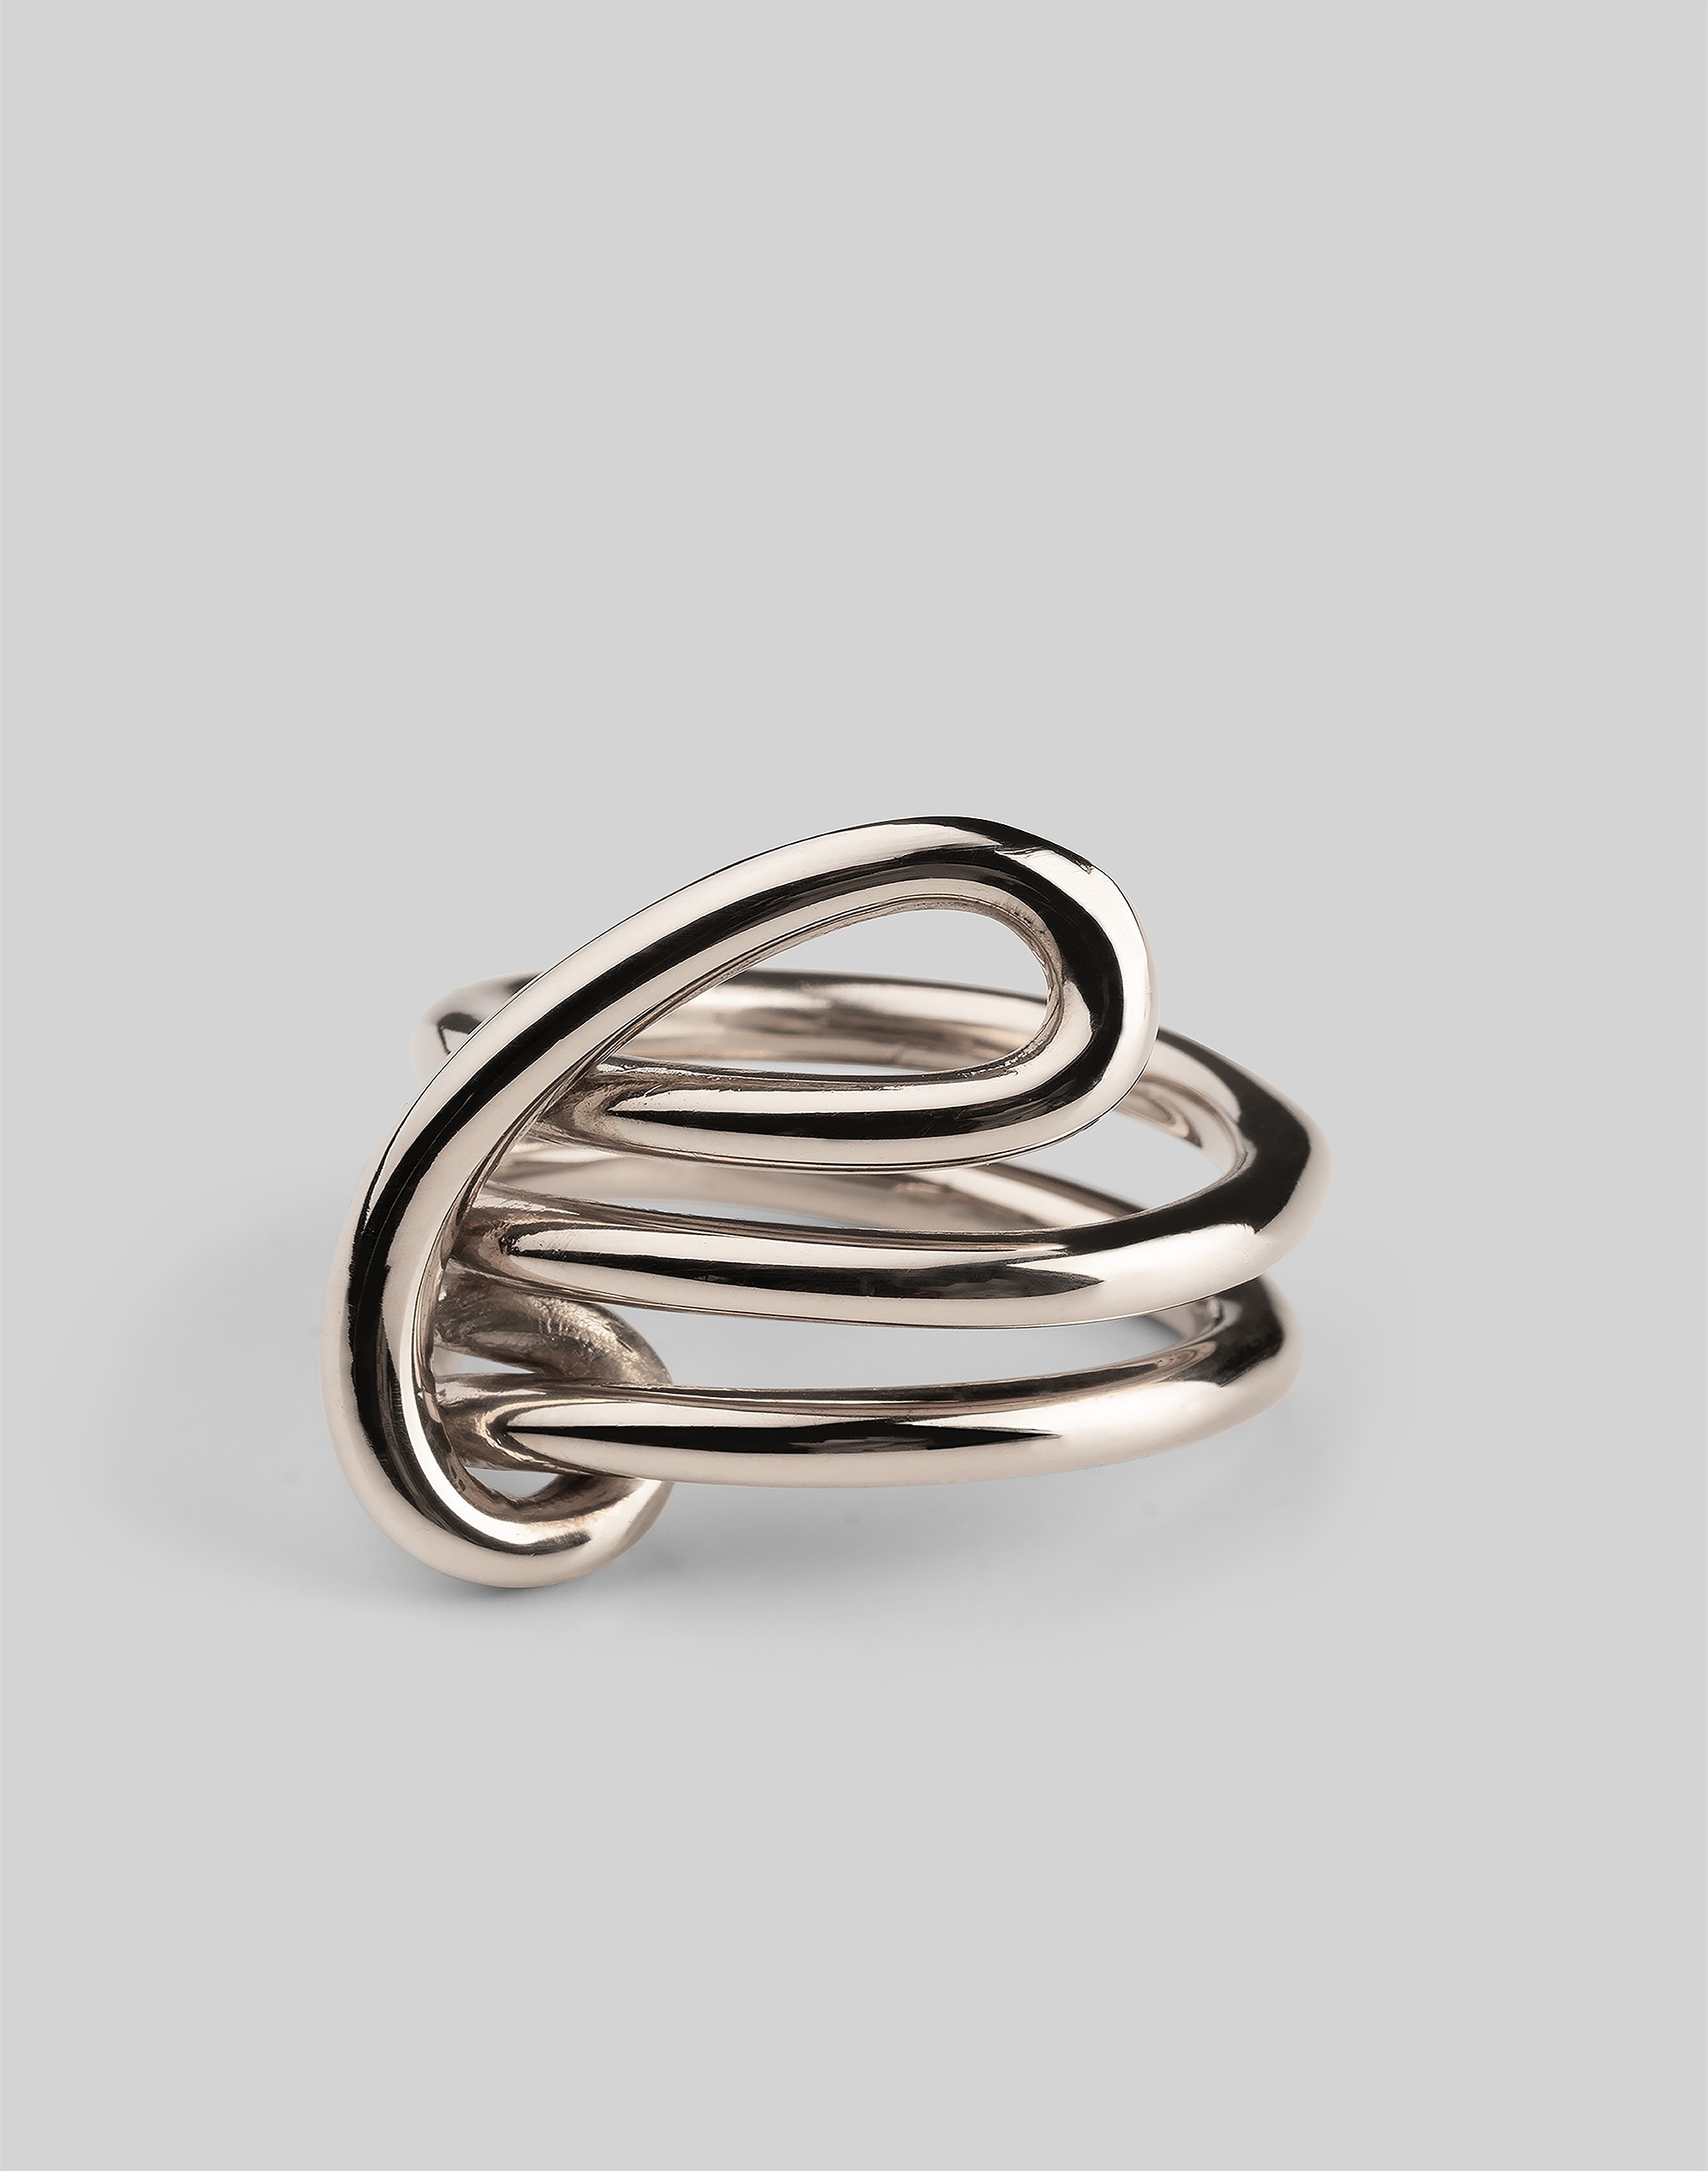 CHARLOTTE CAUWE STUDIO LUCIENNE RING IN STERLING SILVER